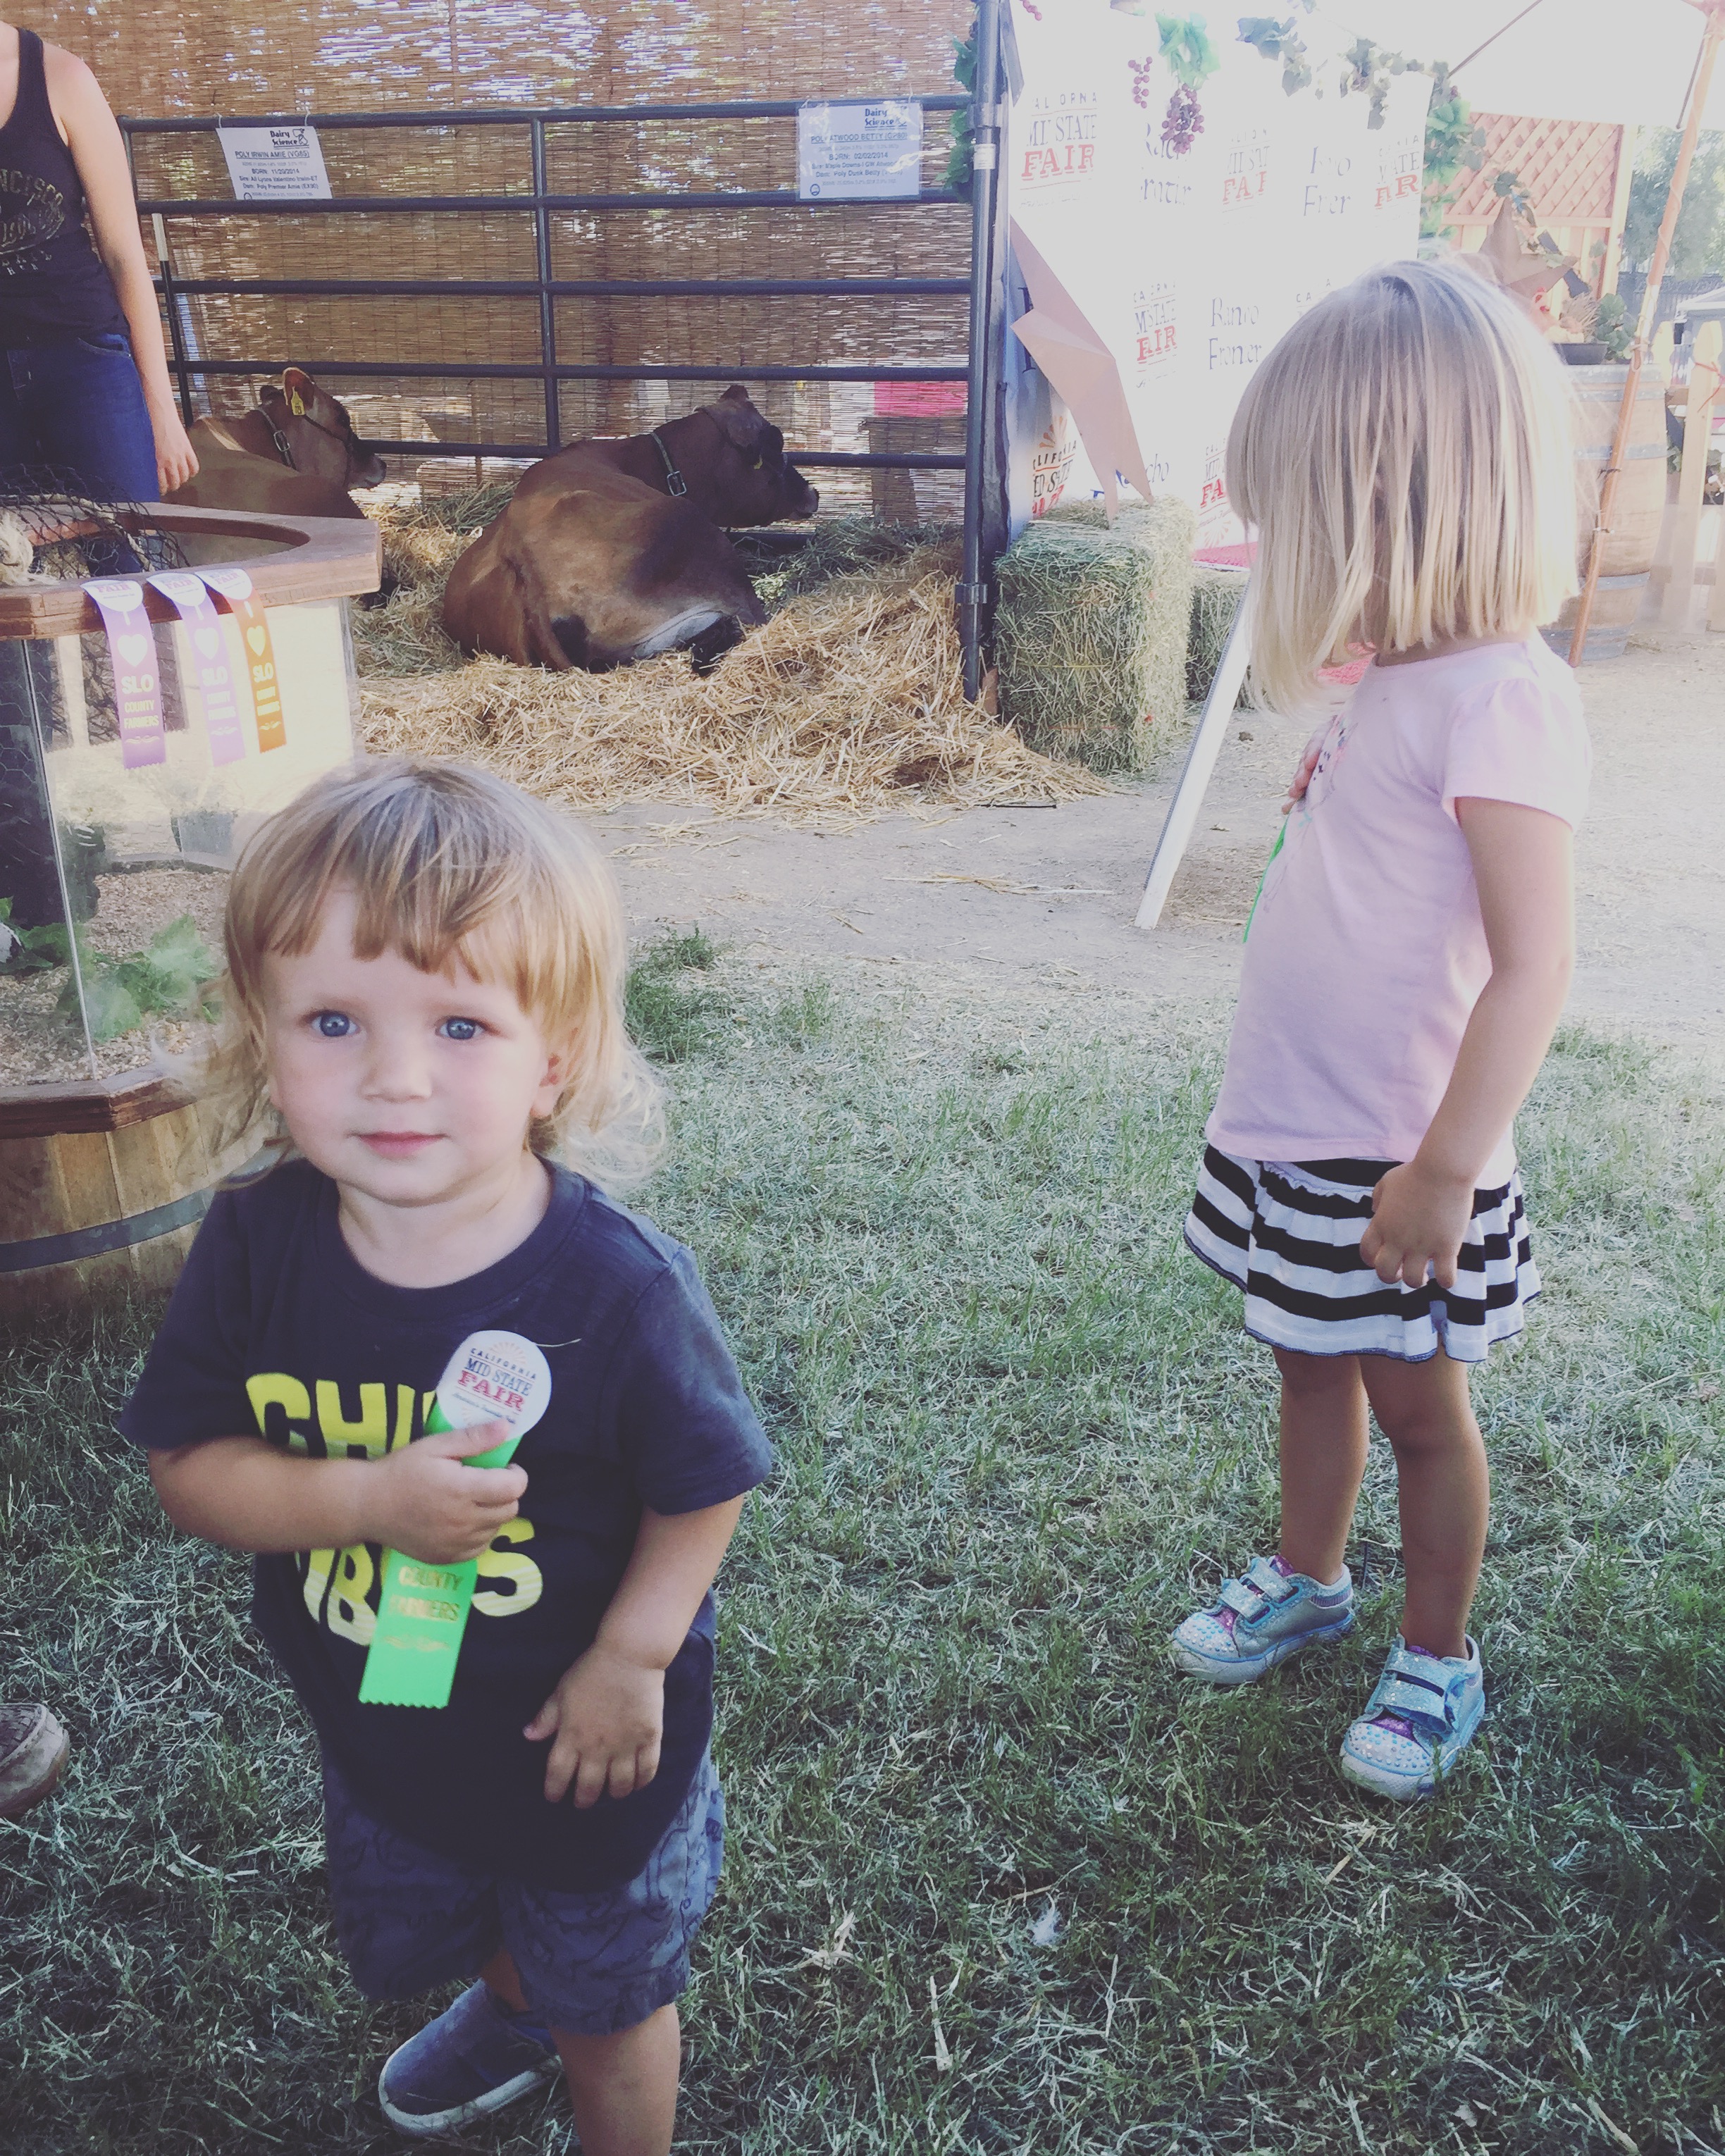 Kids get a sticker badge in the new Farm Fresh Exhibit at the California Mid State Fair